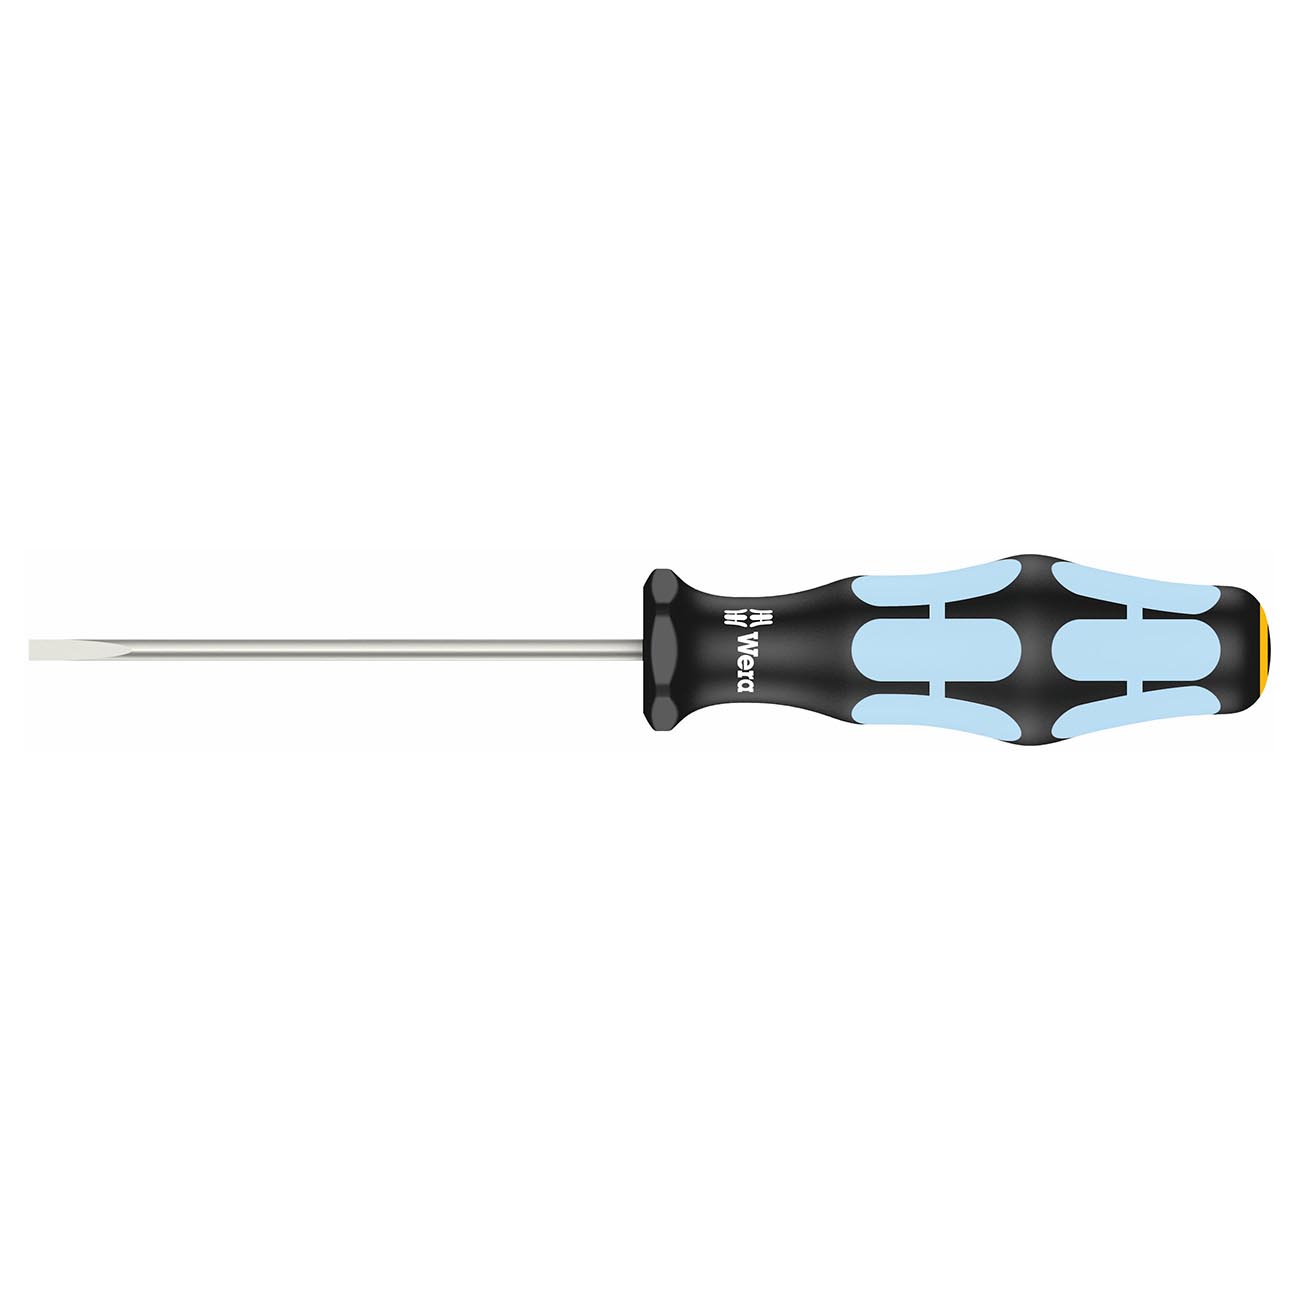 Wera Stainless Steel Screwdriver: Slotted 3mm x 80mm (Without Lasertip)